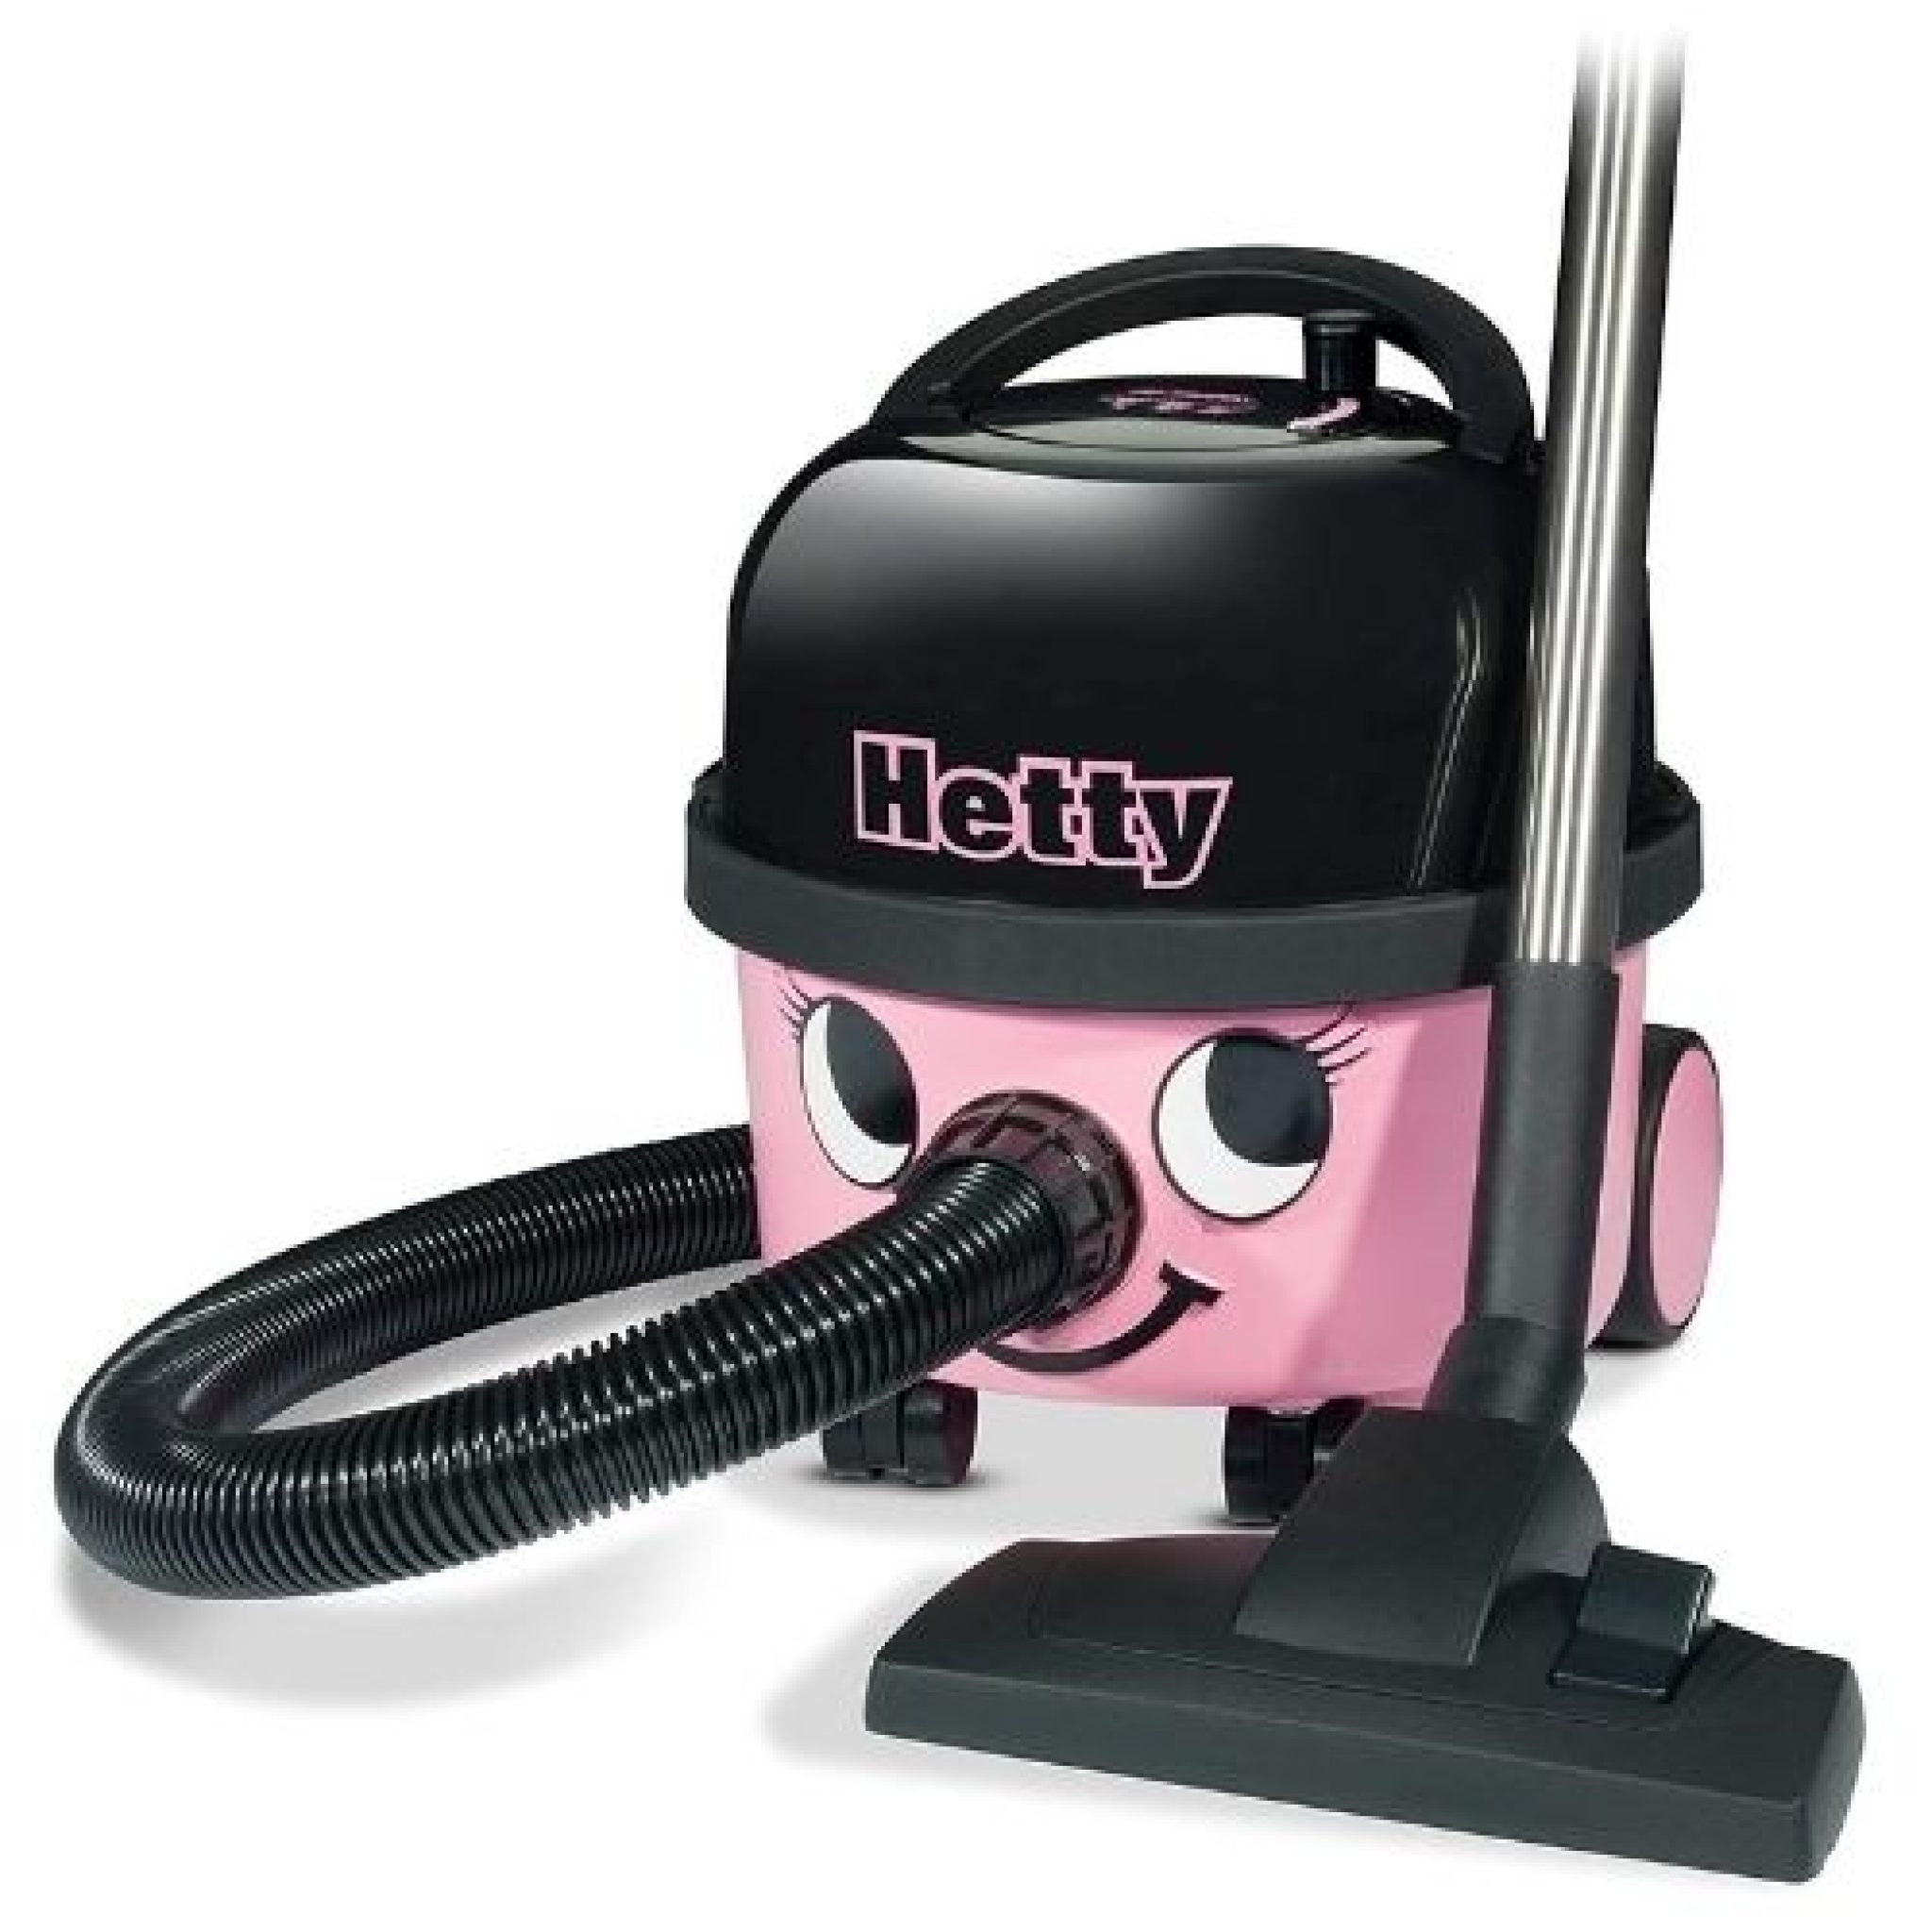 The 10 Best Vacuum Cleaners for Pet Hair to Buy in 2020